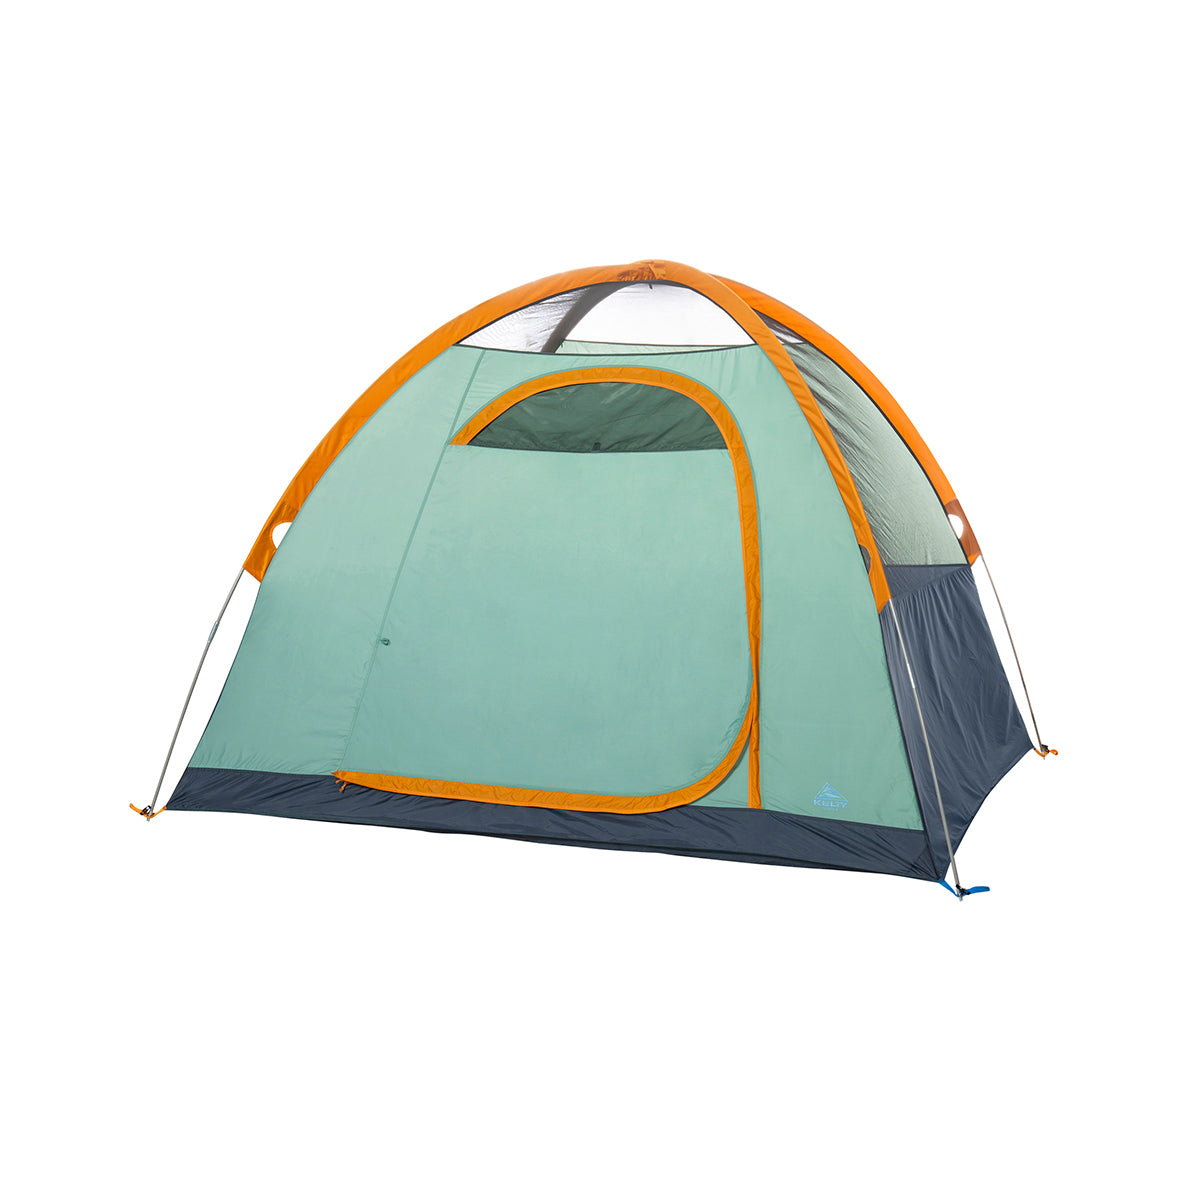 kelty tallboy 4 person tent no fly front view in color light teal with orange accents